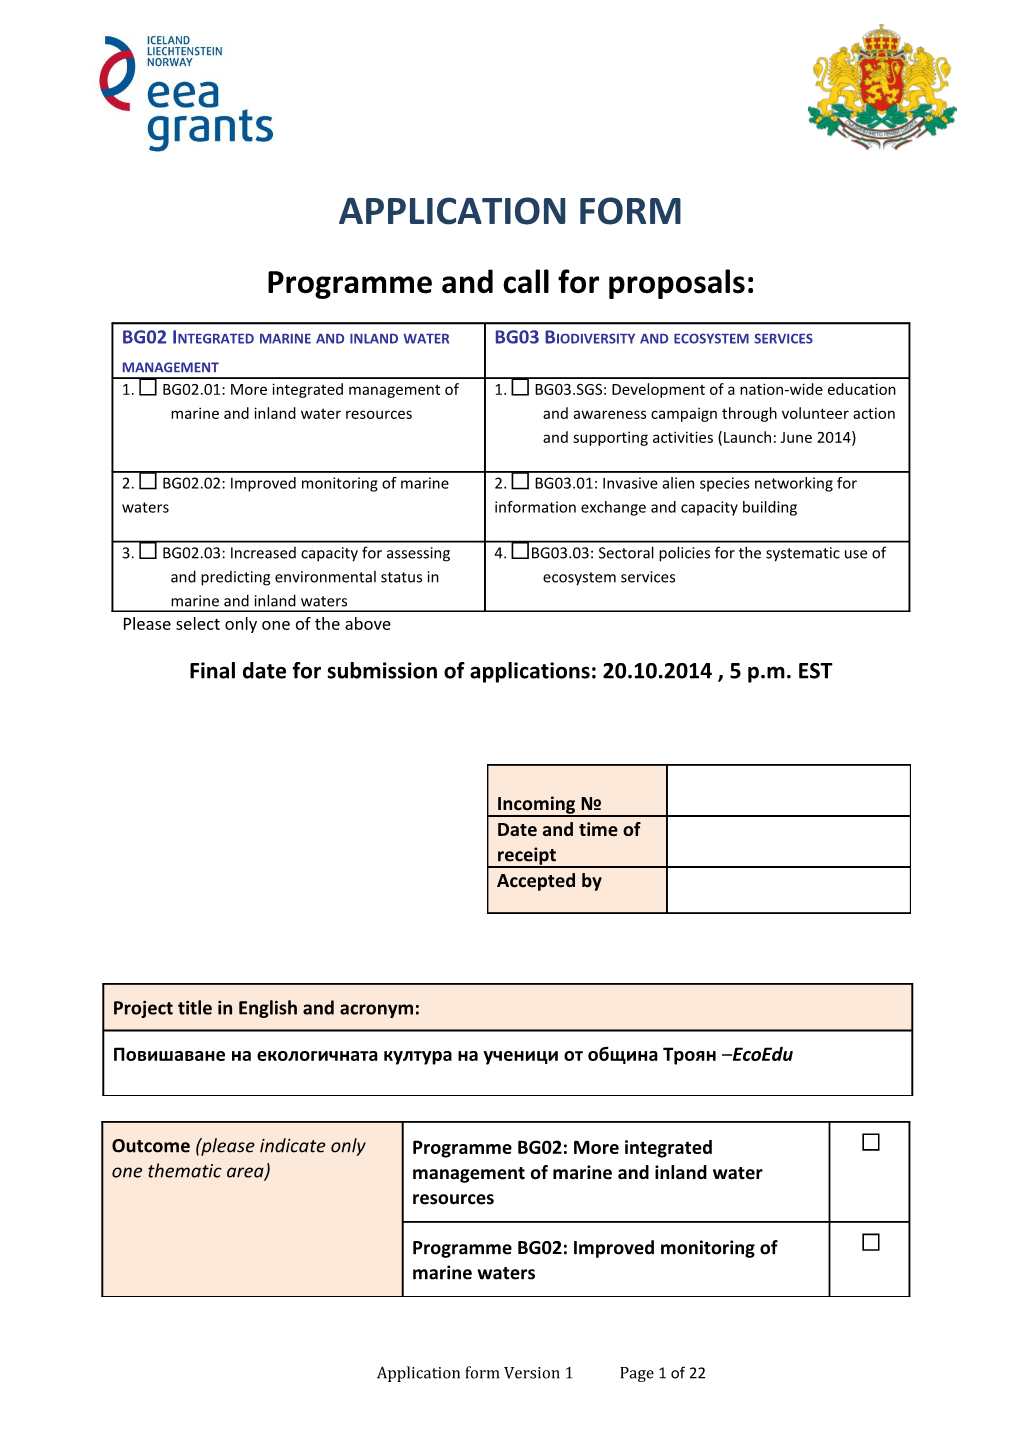 Programme and Call for Proposals